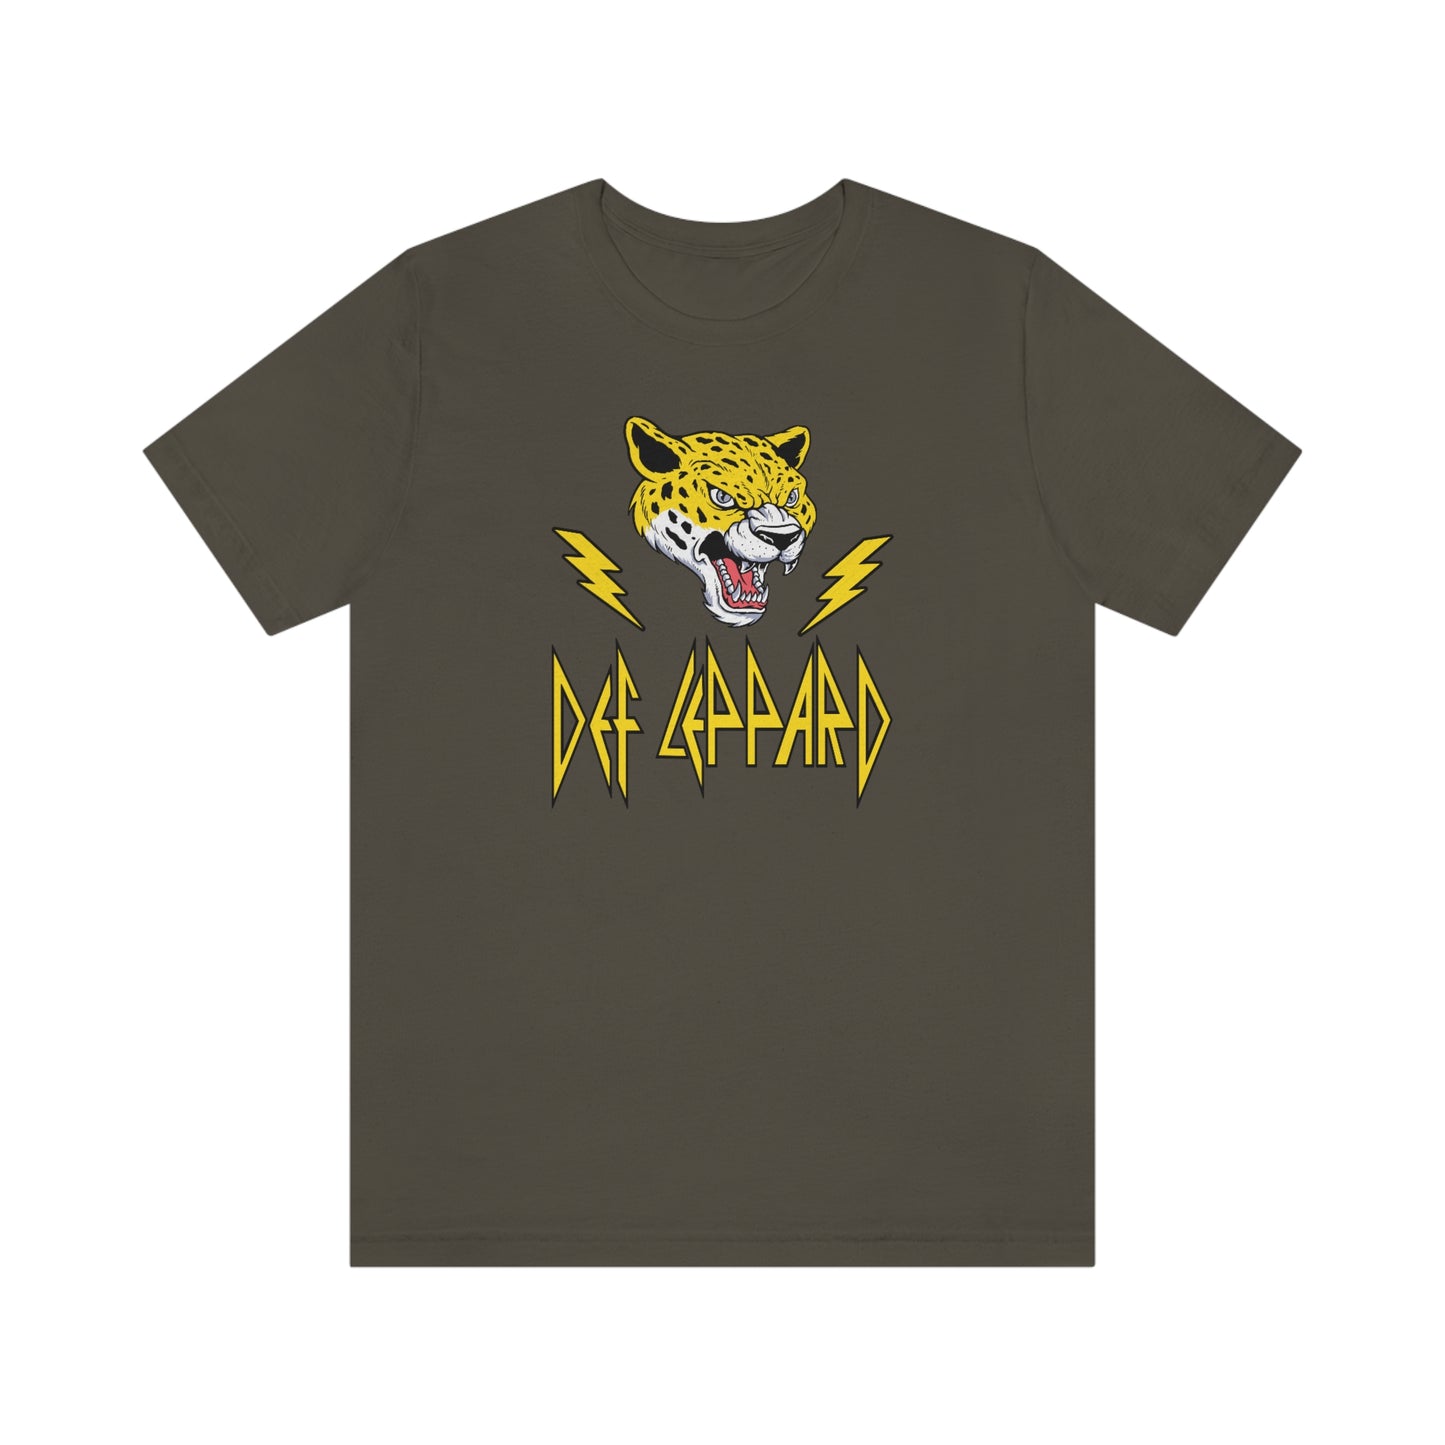 Def Leppard Shirt Gift For Fans,High 'N' Dry Album Shirt For Def Leppard Fans,Gift For Music Lover,Rock Band Shirt,Vintage Def Leppard Shirt